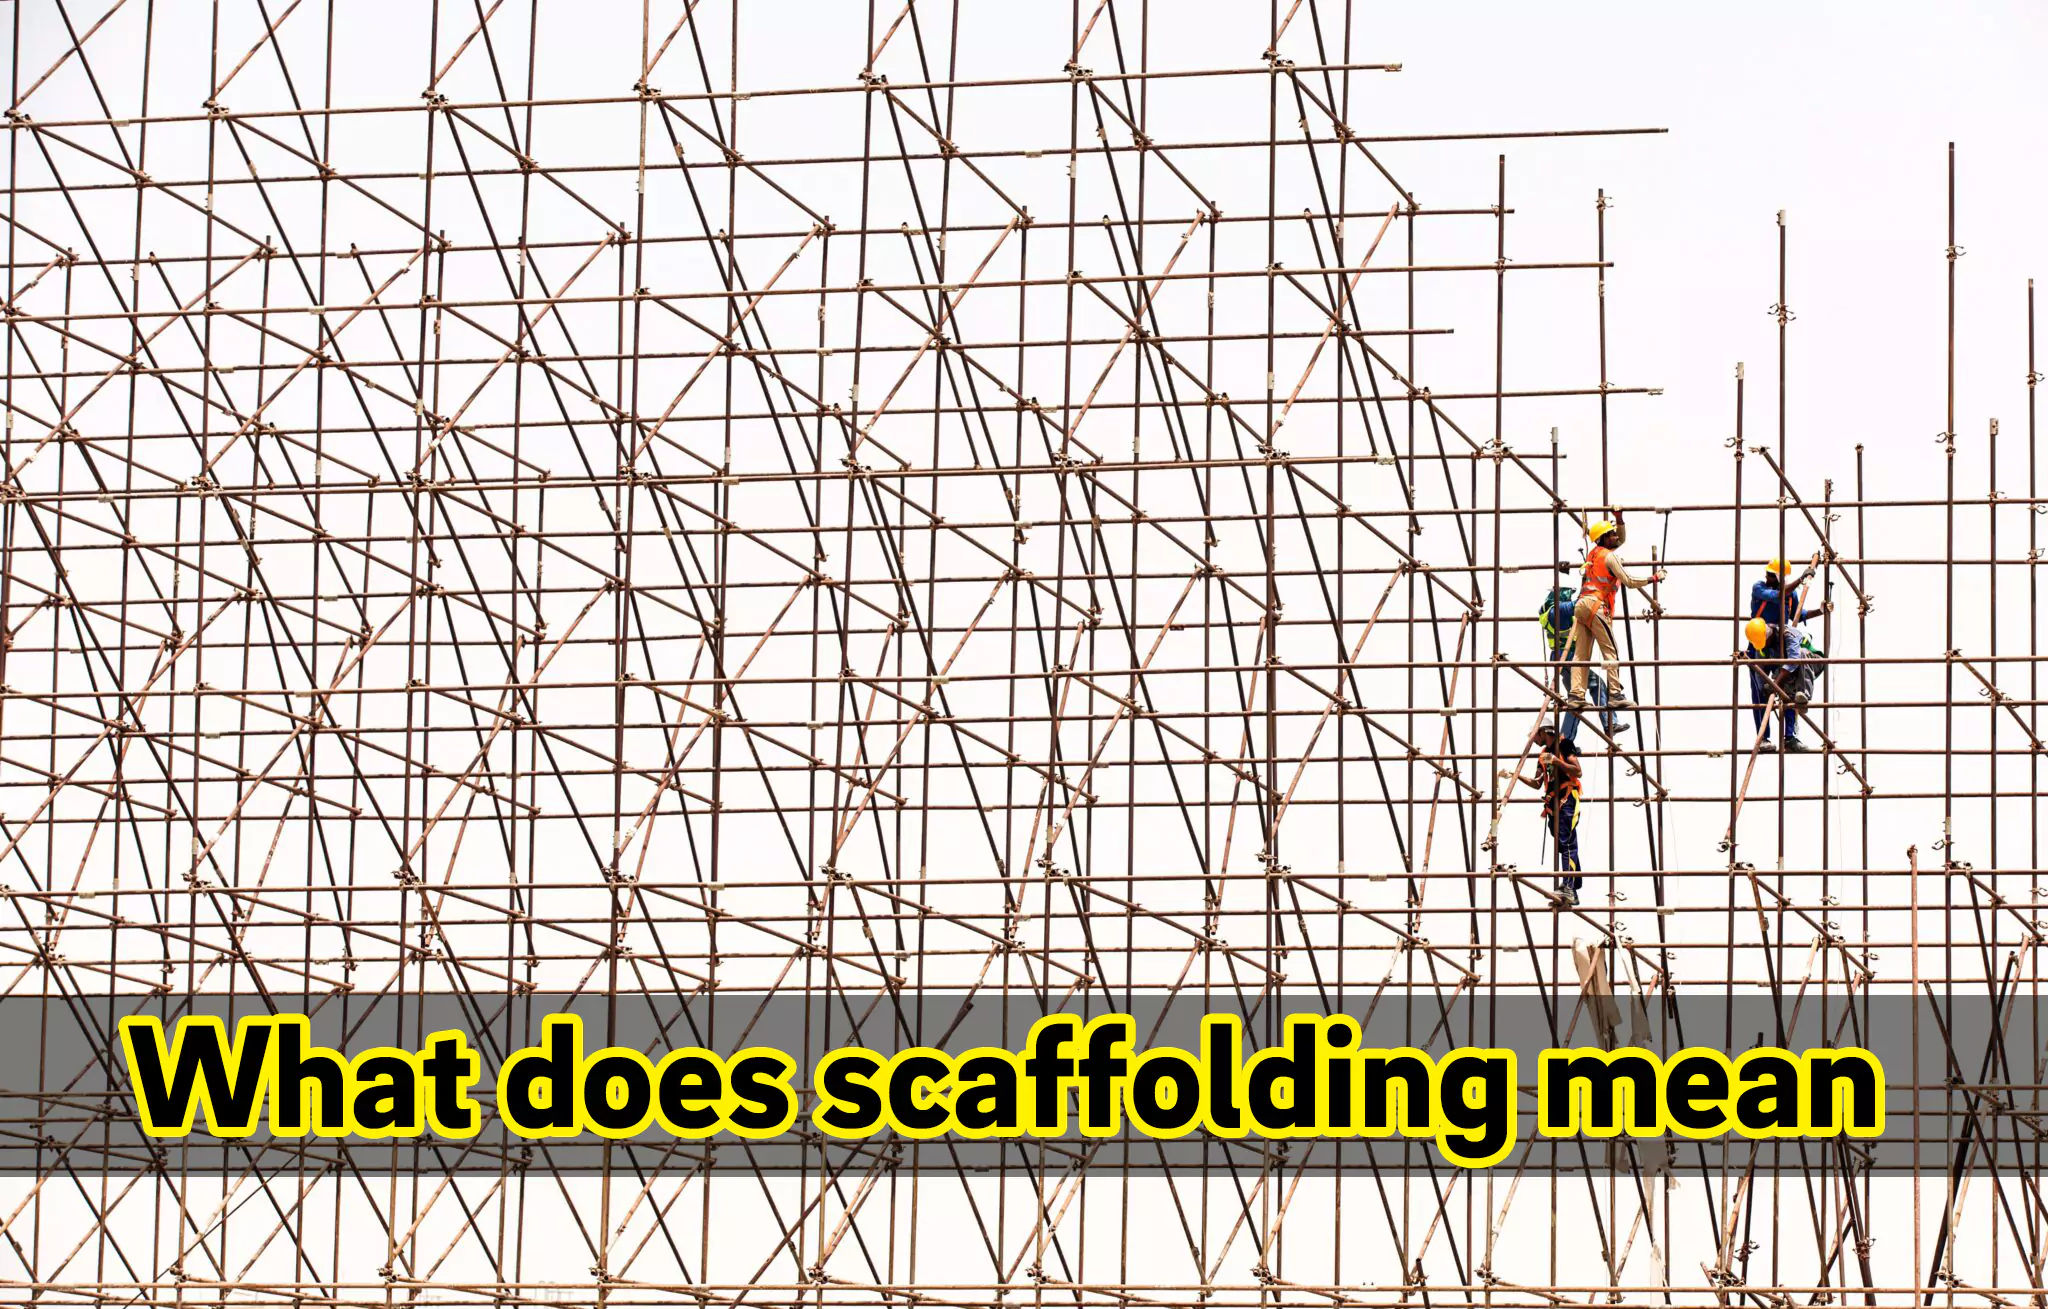 What does scaffolding mean